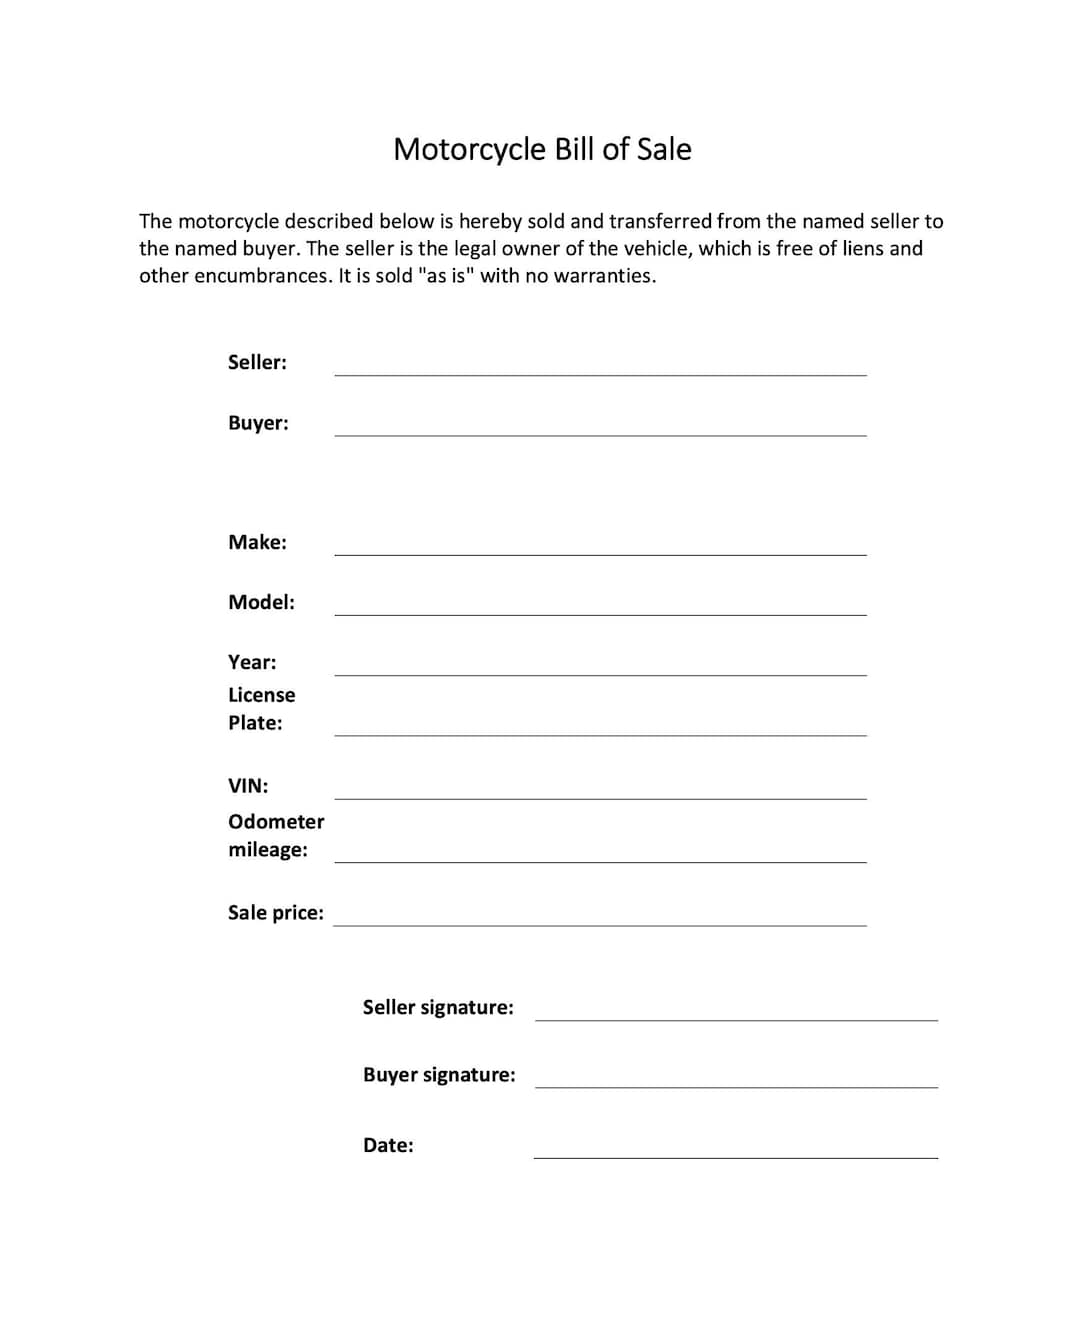 motorcycle-bill-of-sale-motorbike-quadbike-sale-contract-etsy